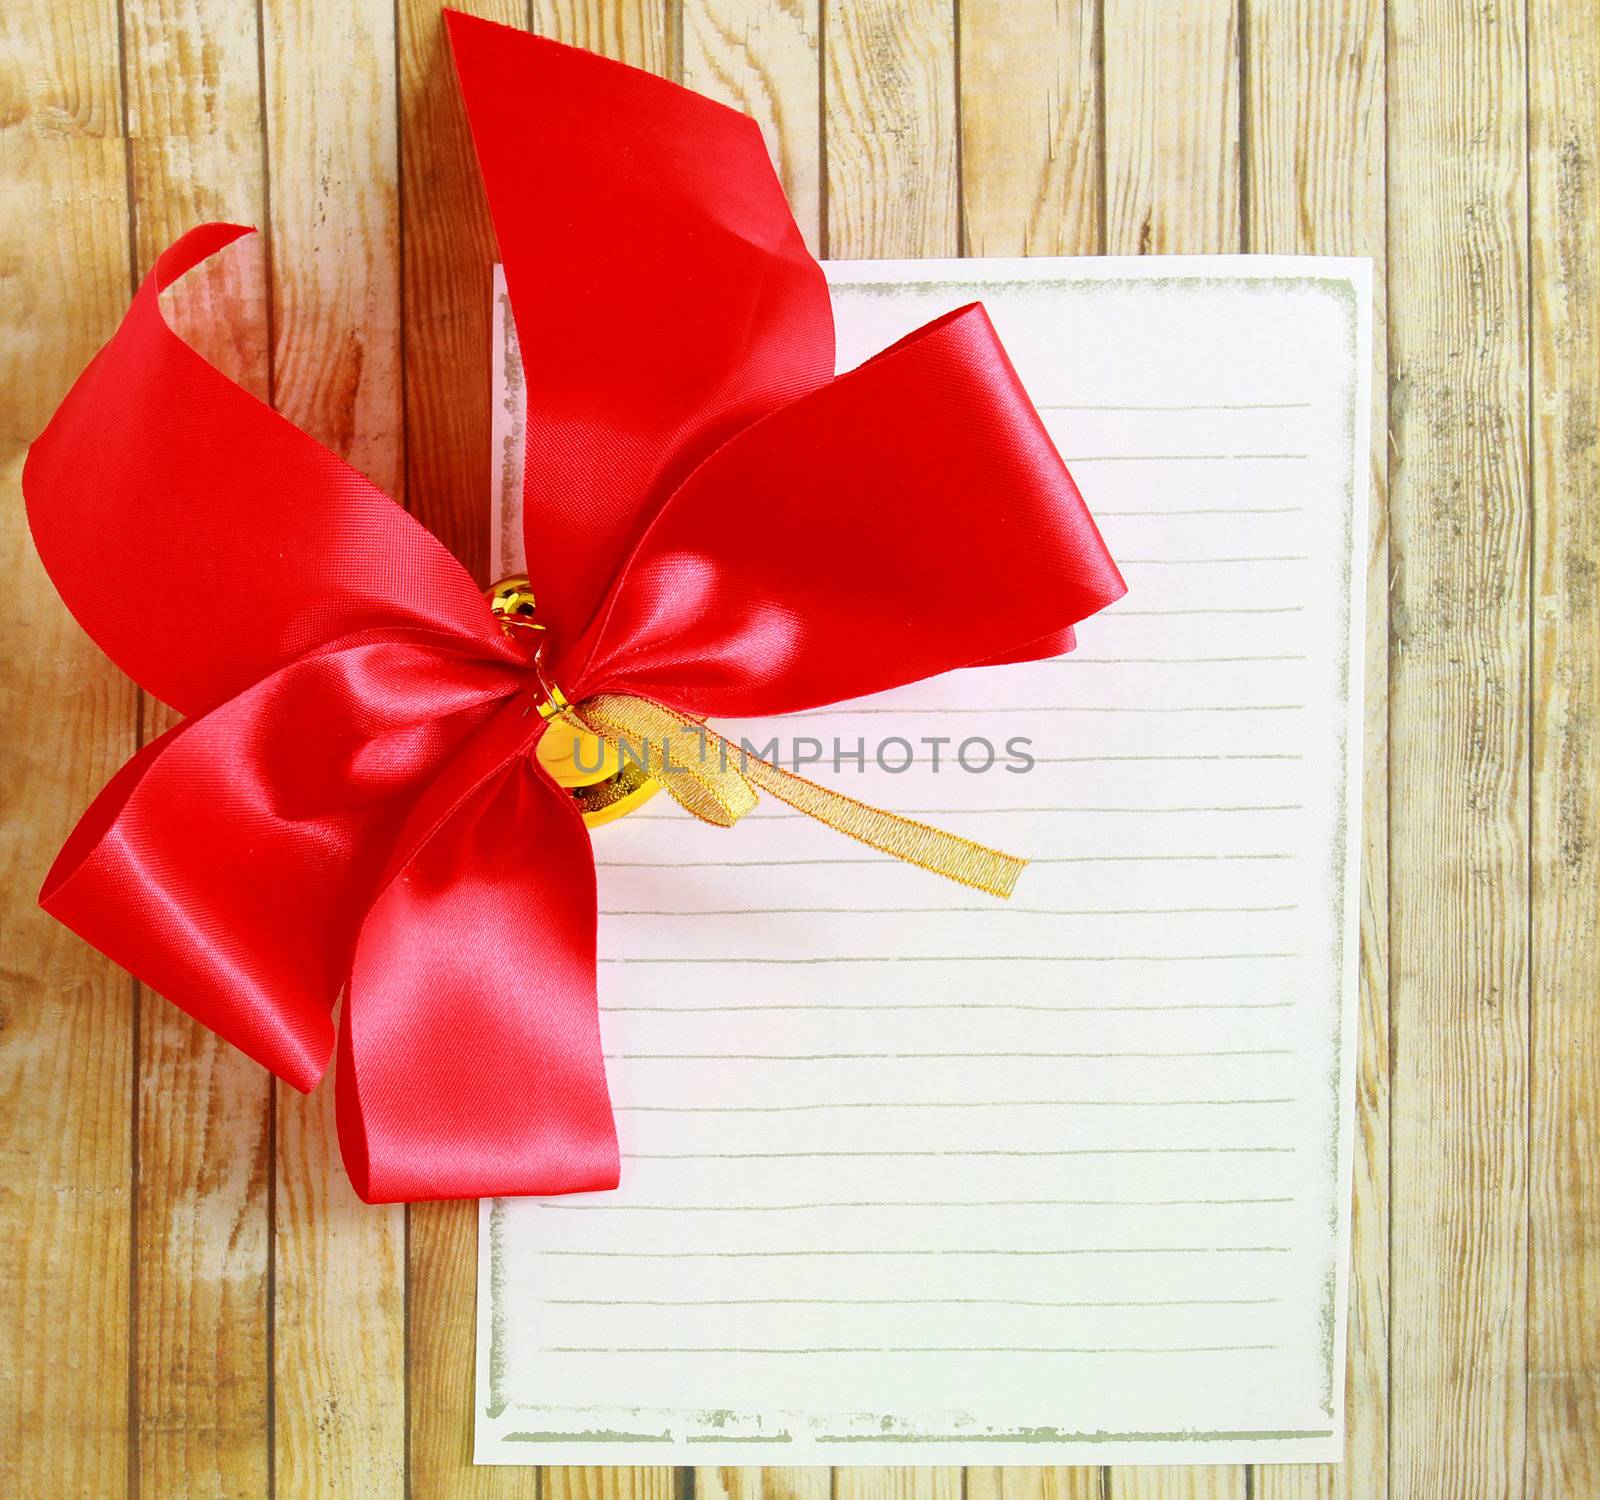 Red ribbon with blank notebook over wooden background  by nuchylee